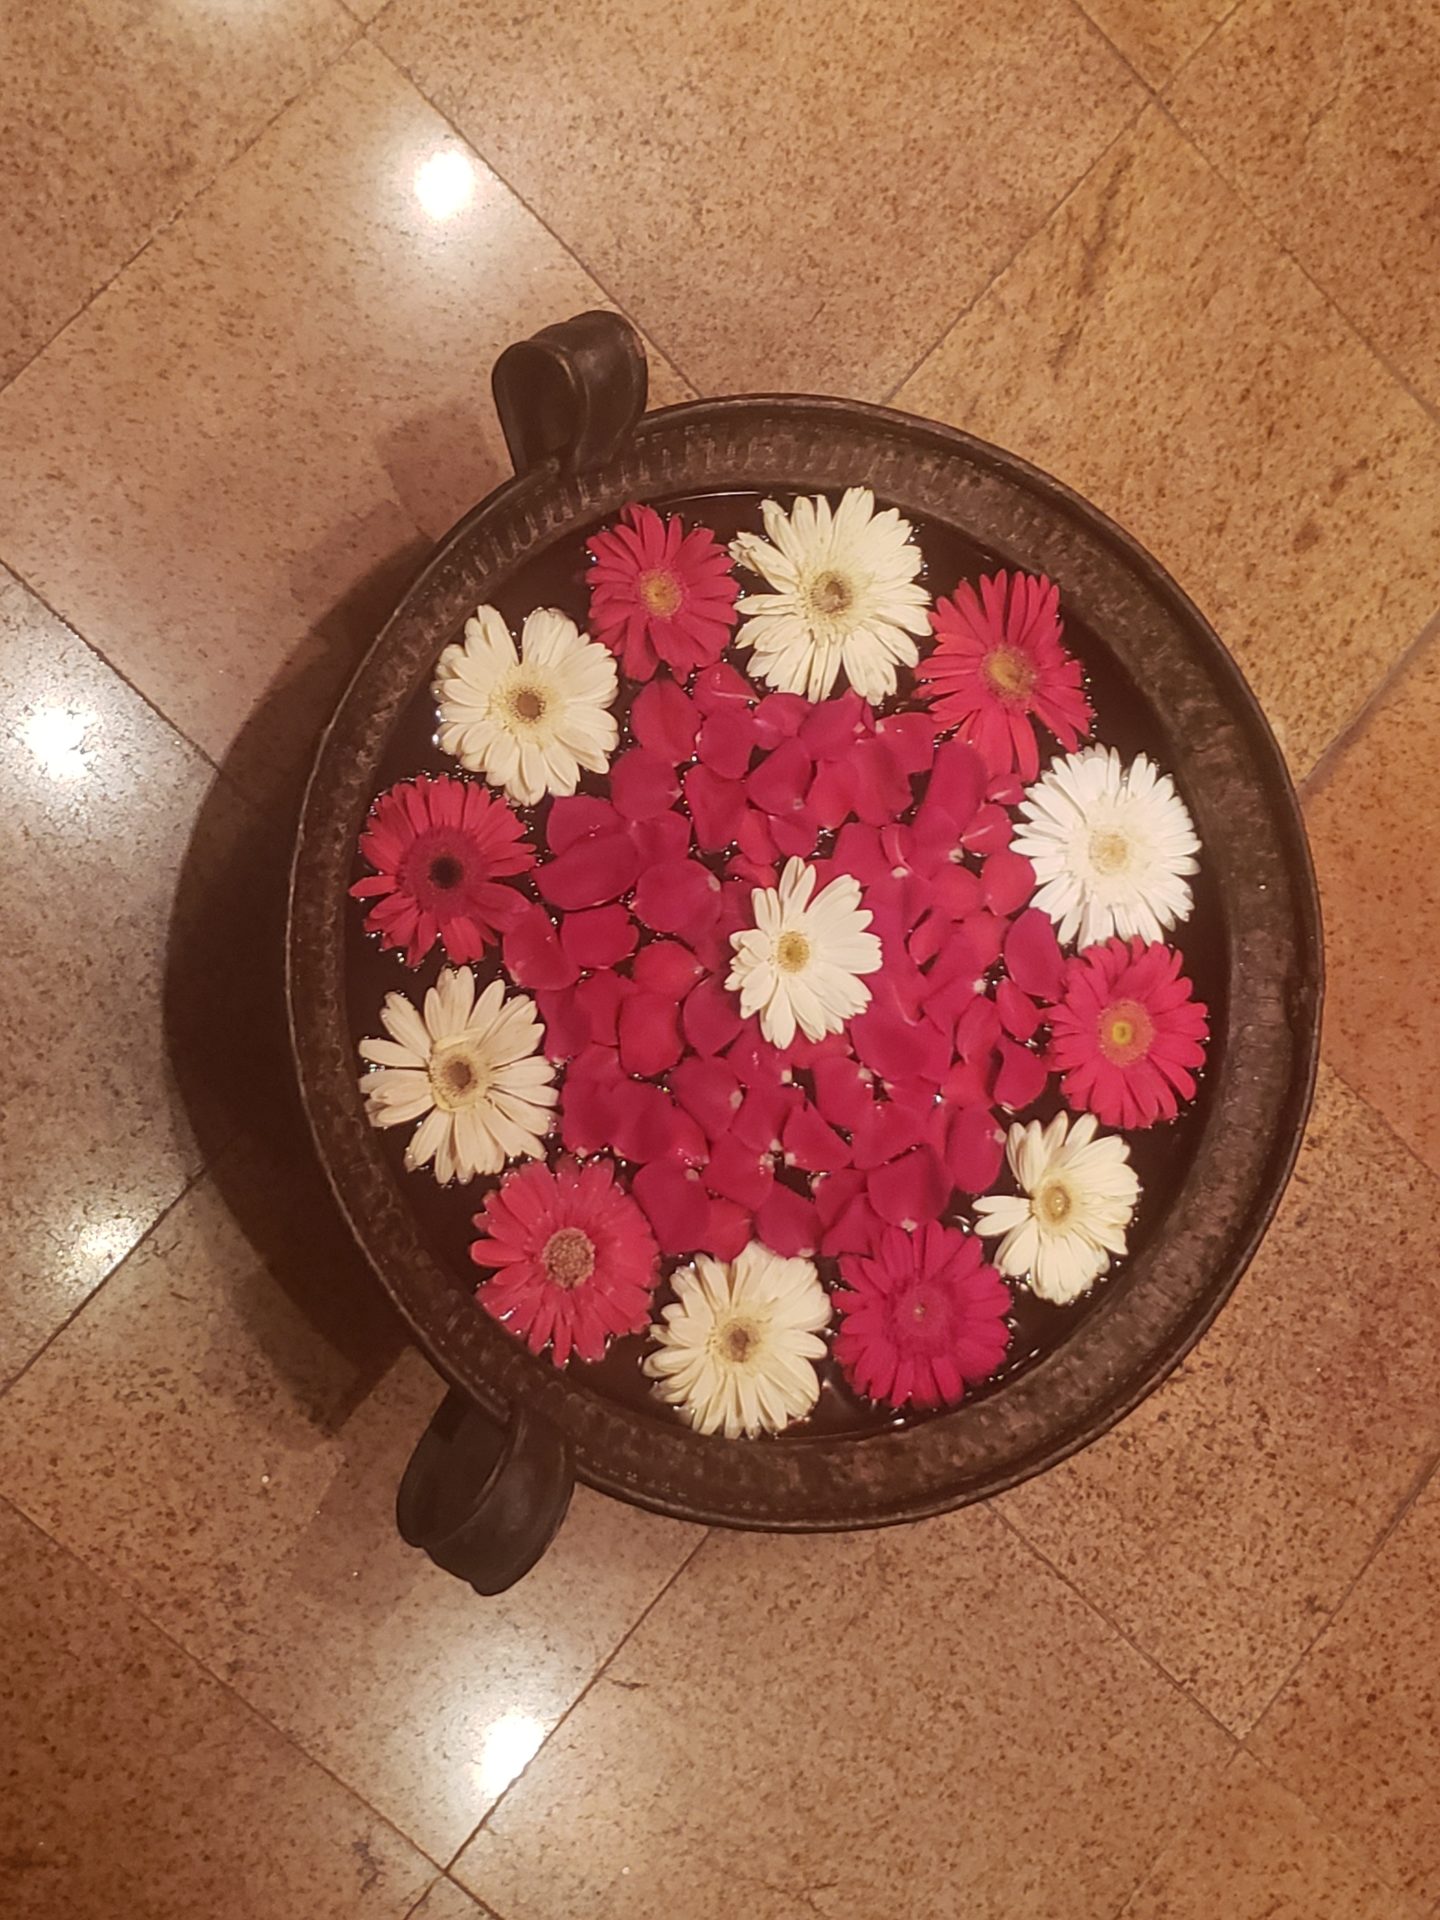 a bowl of flowers on a tile floor